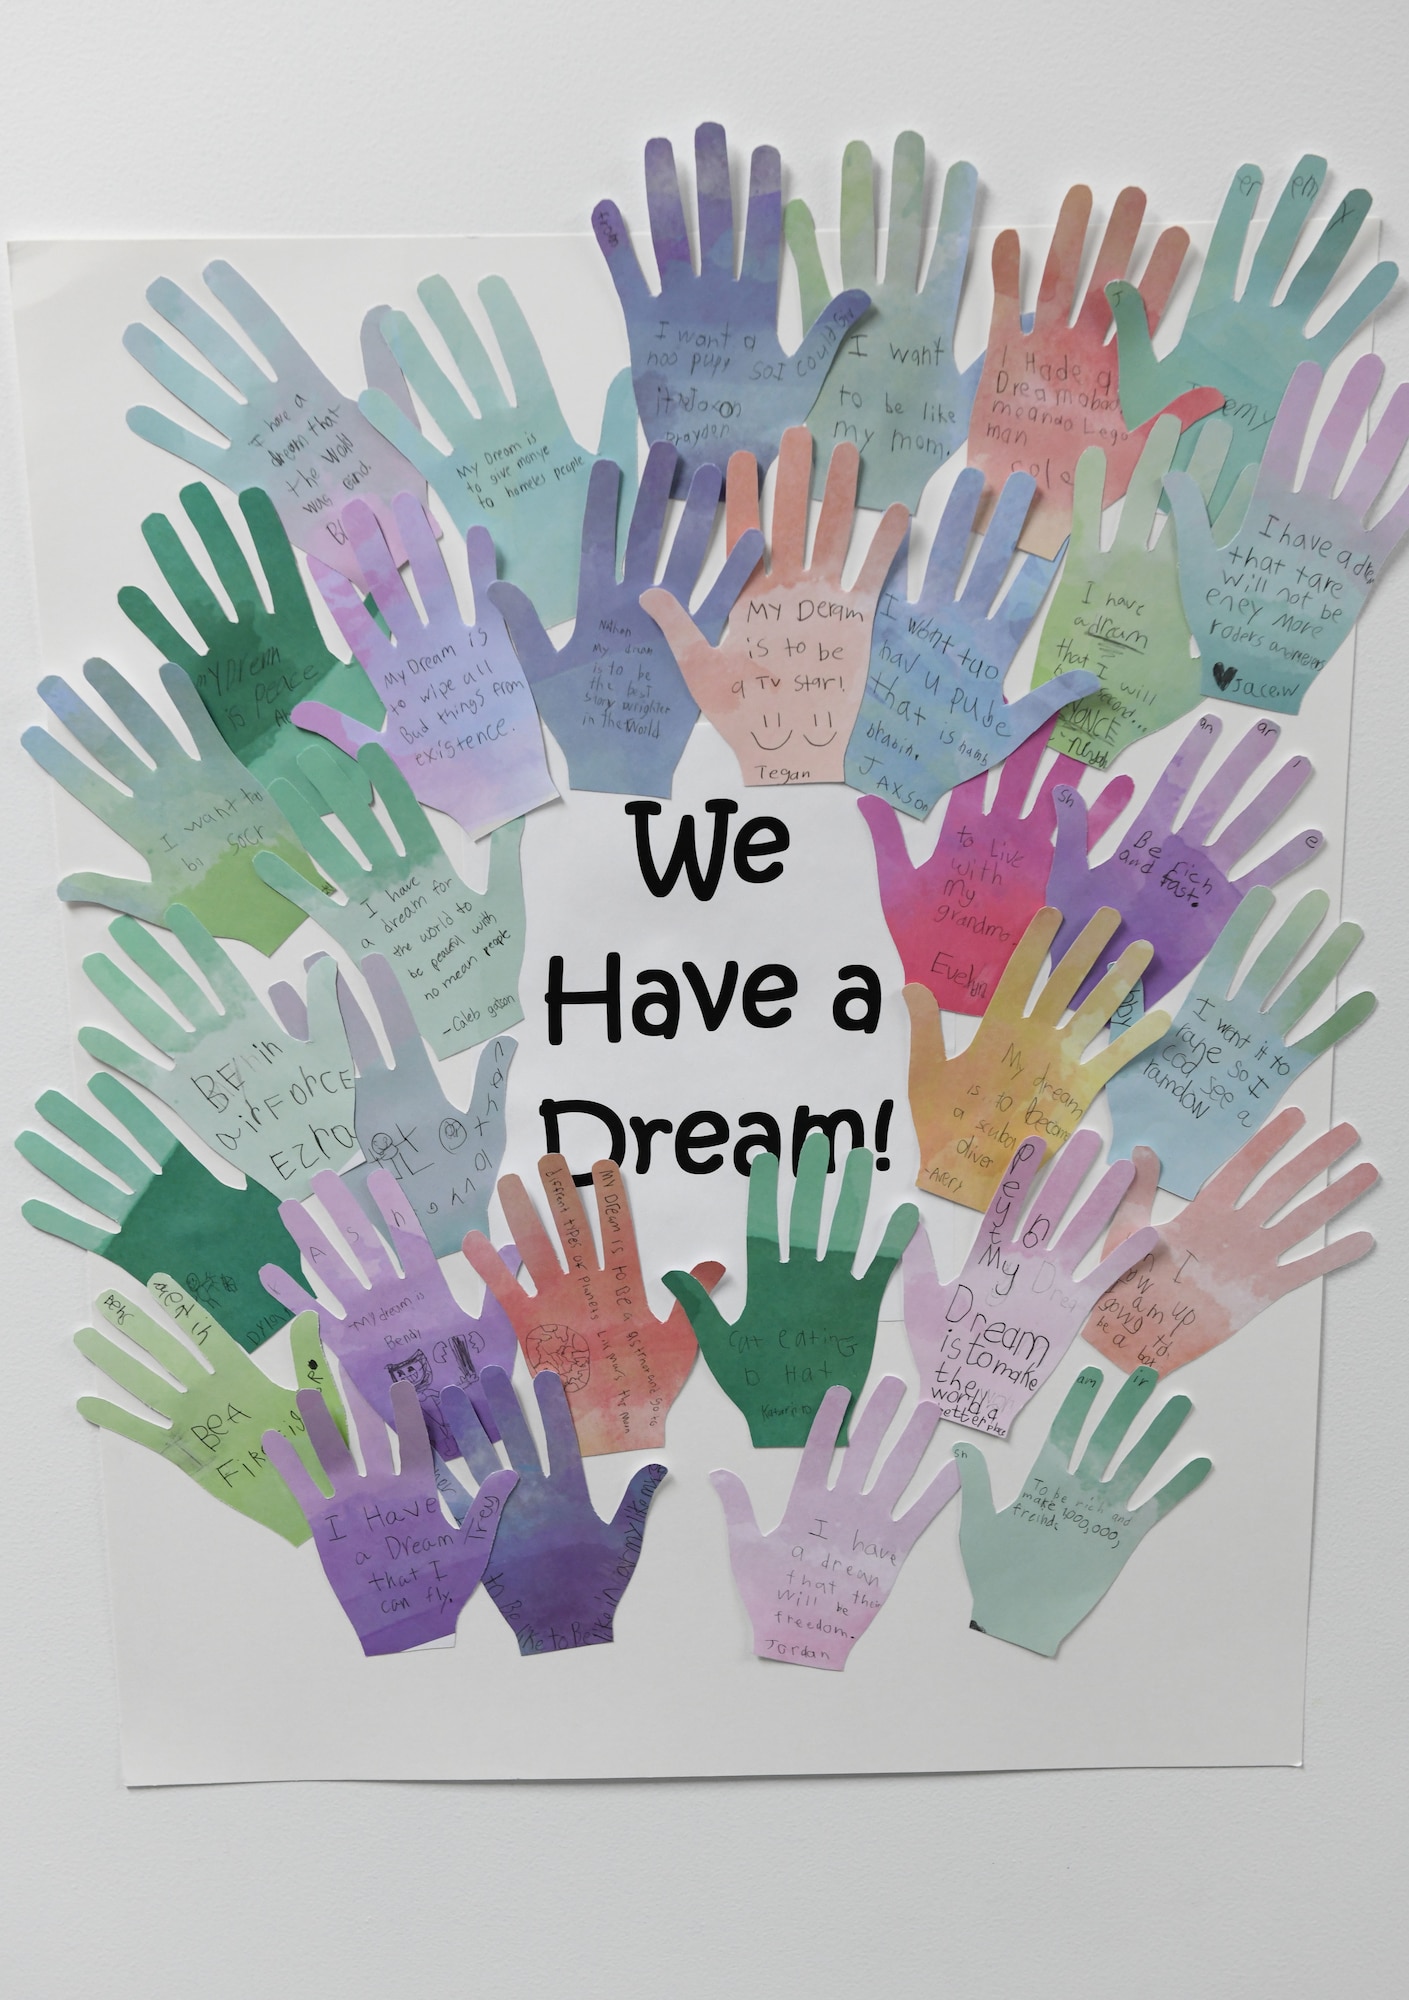 Children at the Youth Center write their dreams on paper hands to create a wall display during a Black History Month event at the Youth Center Feb. 12, 2020, at Malmstrom Air Force Base, Mont.